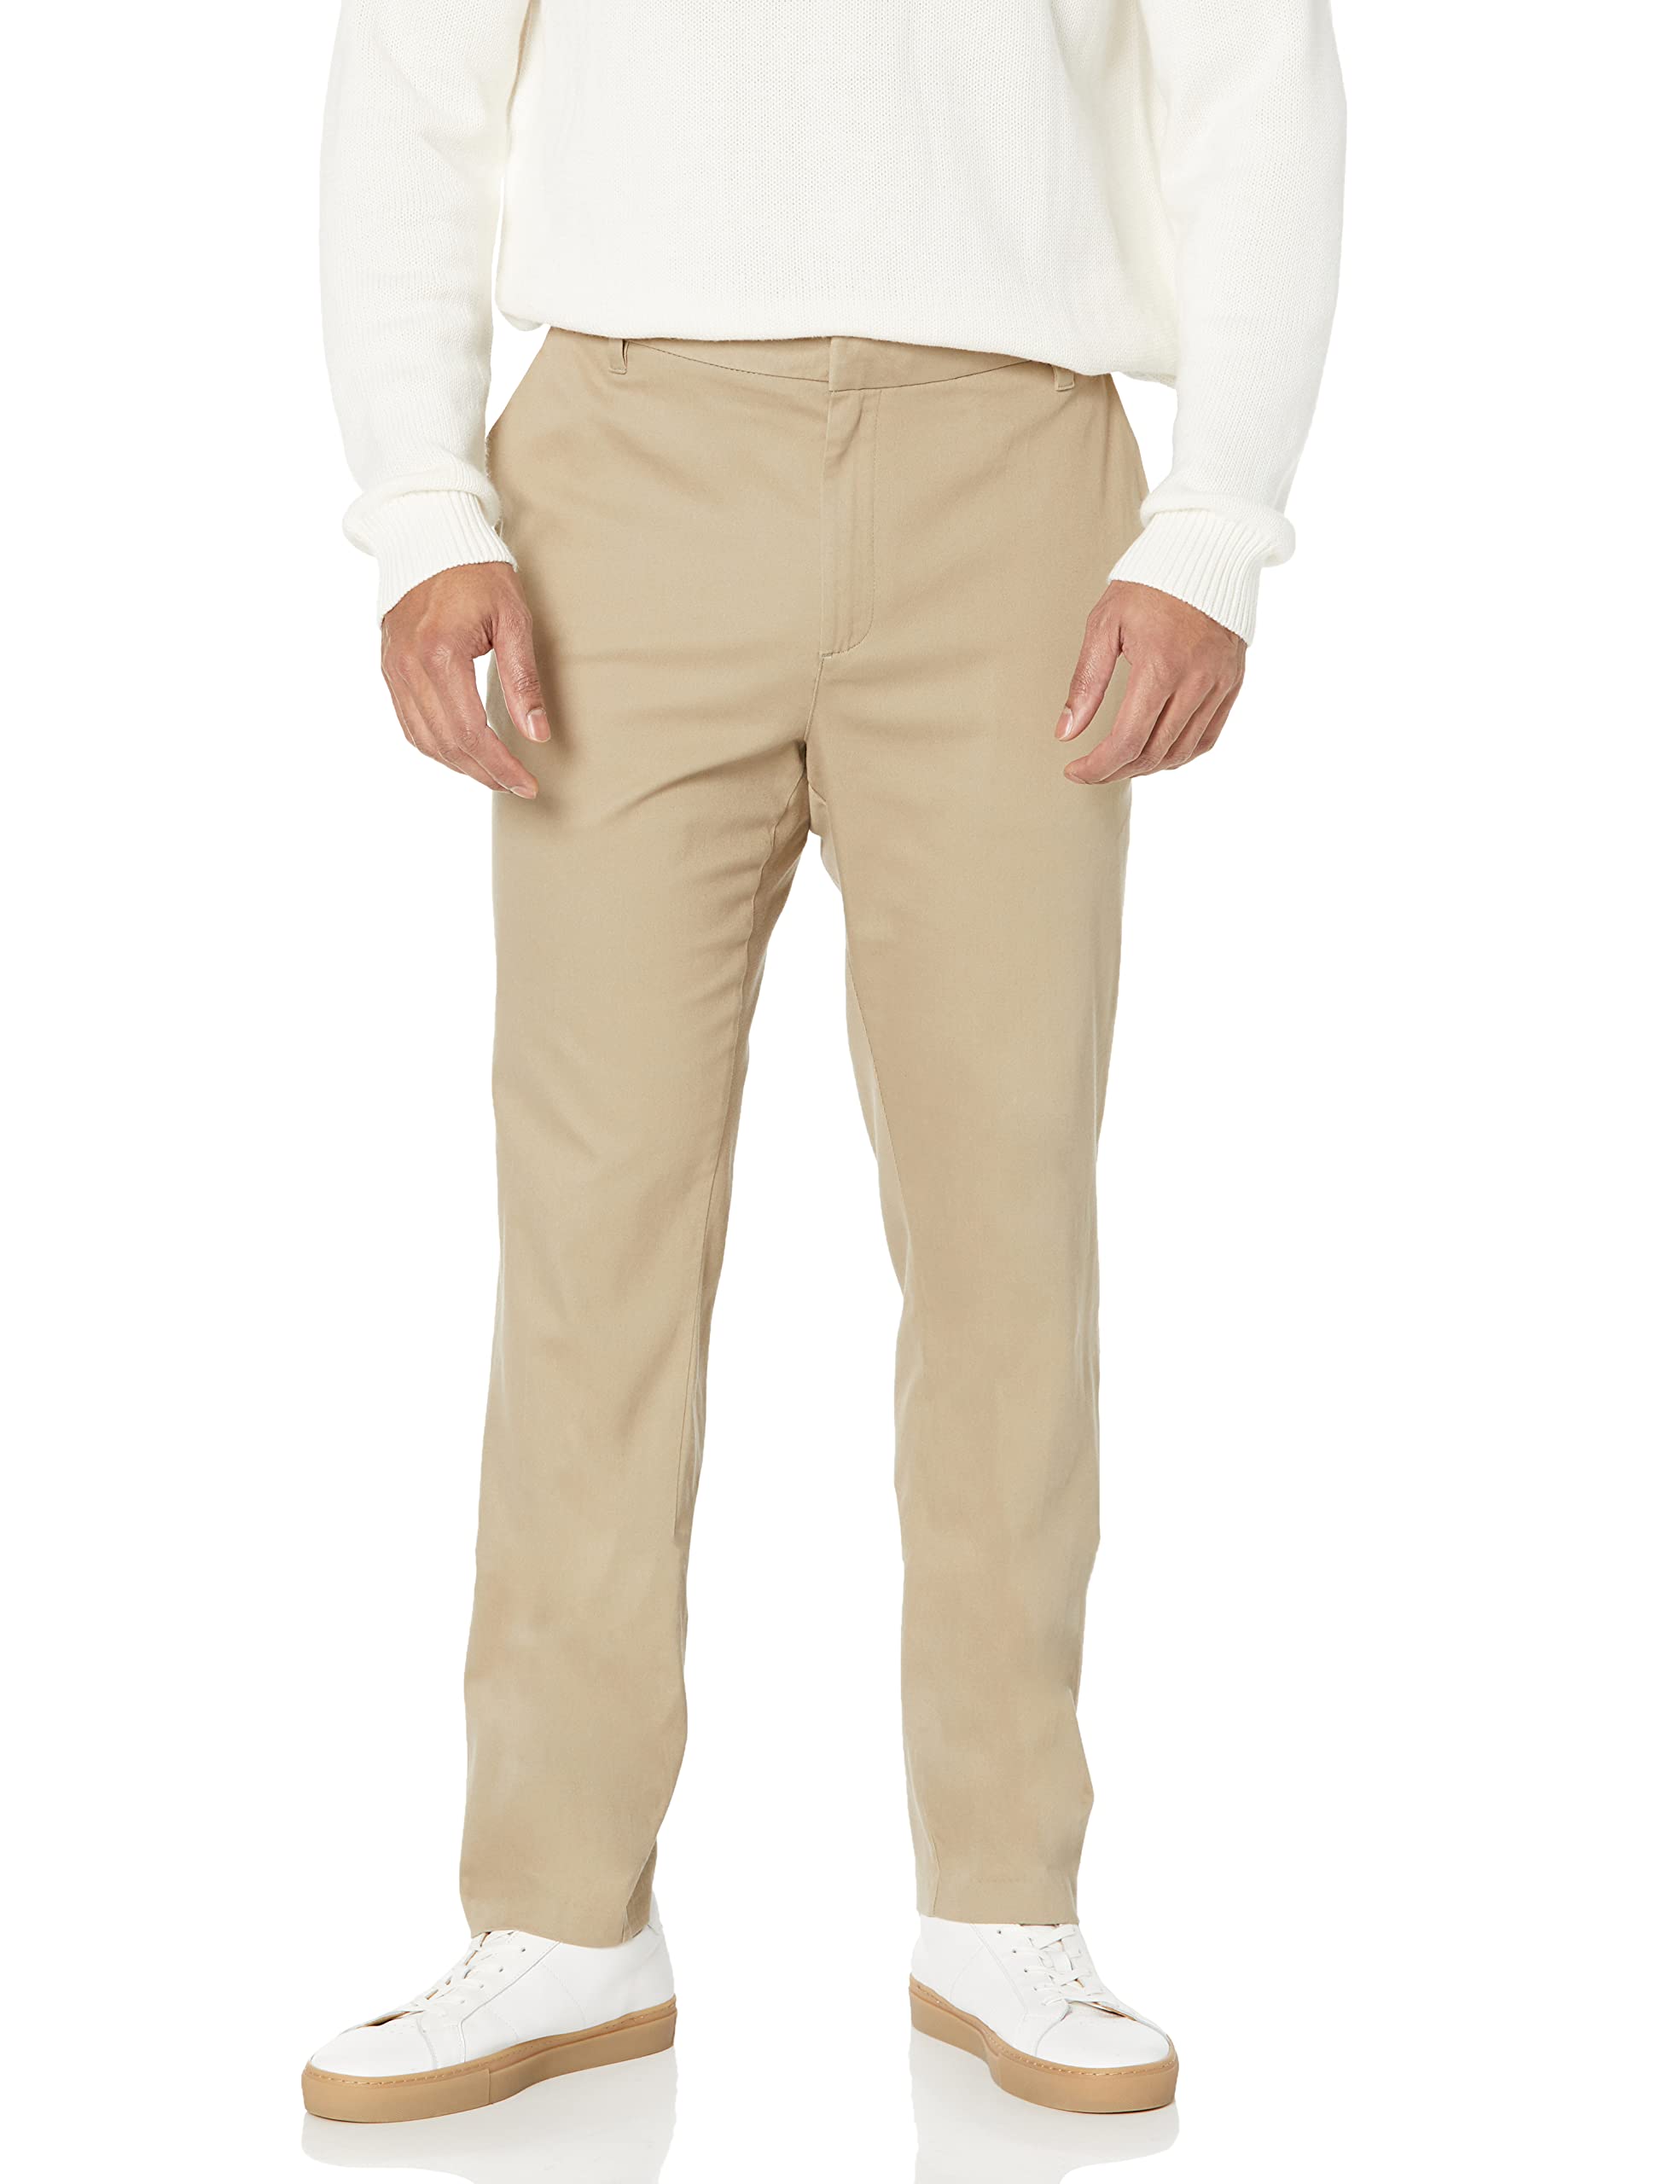 Amazon Essentials Men's Slim-Fit Wrinkle-Resistant Flat-Front Stretch Chino Pant